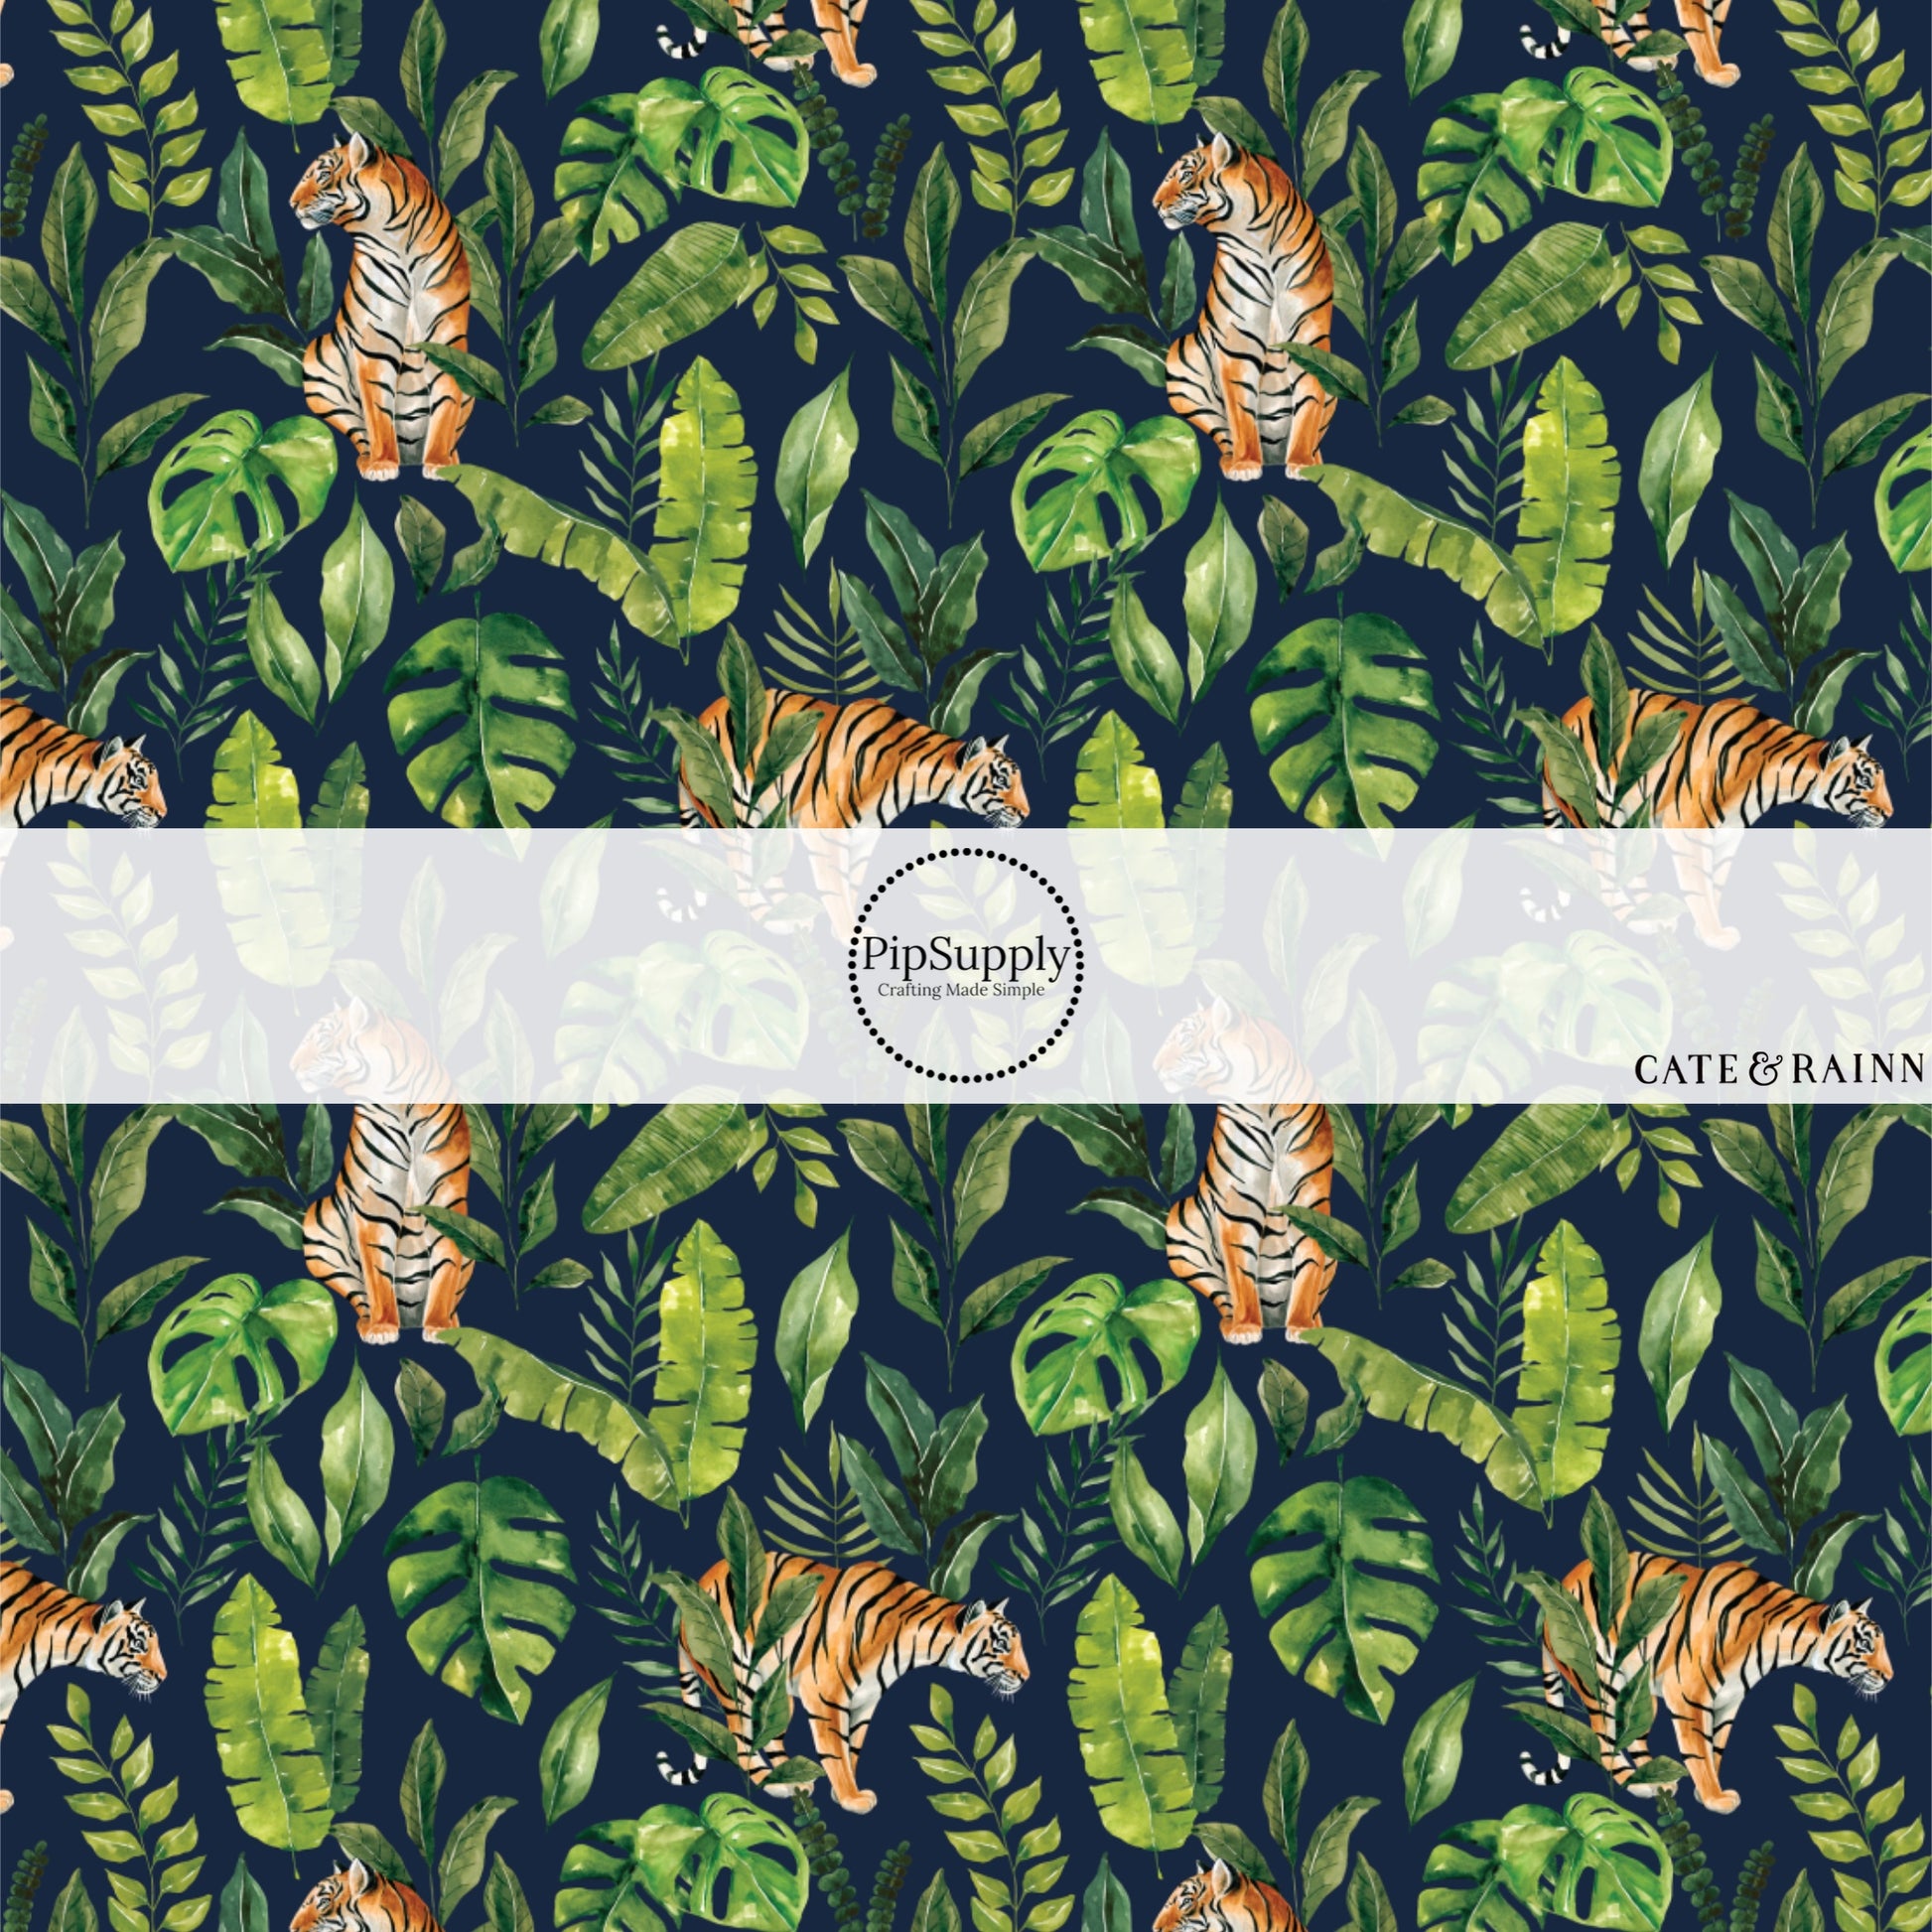 These jungle pattern faux leather sheets contain the following design elements: tropical jungle tigers. Our CPSIA compliant faux leather sheets or rolls can be used for all types of crafting projects.